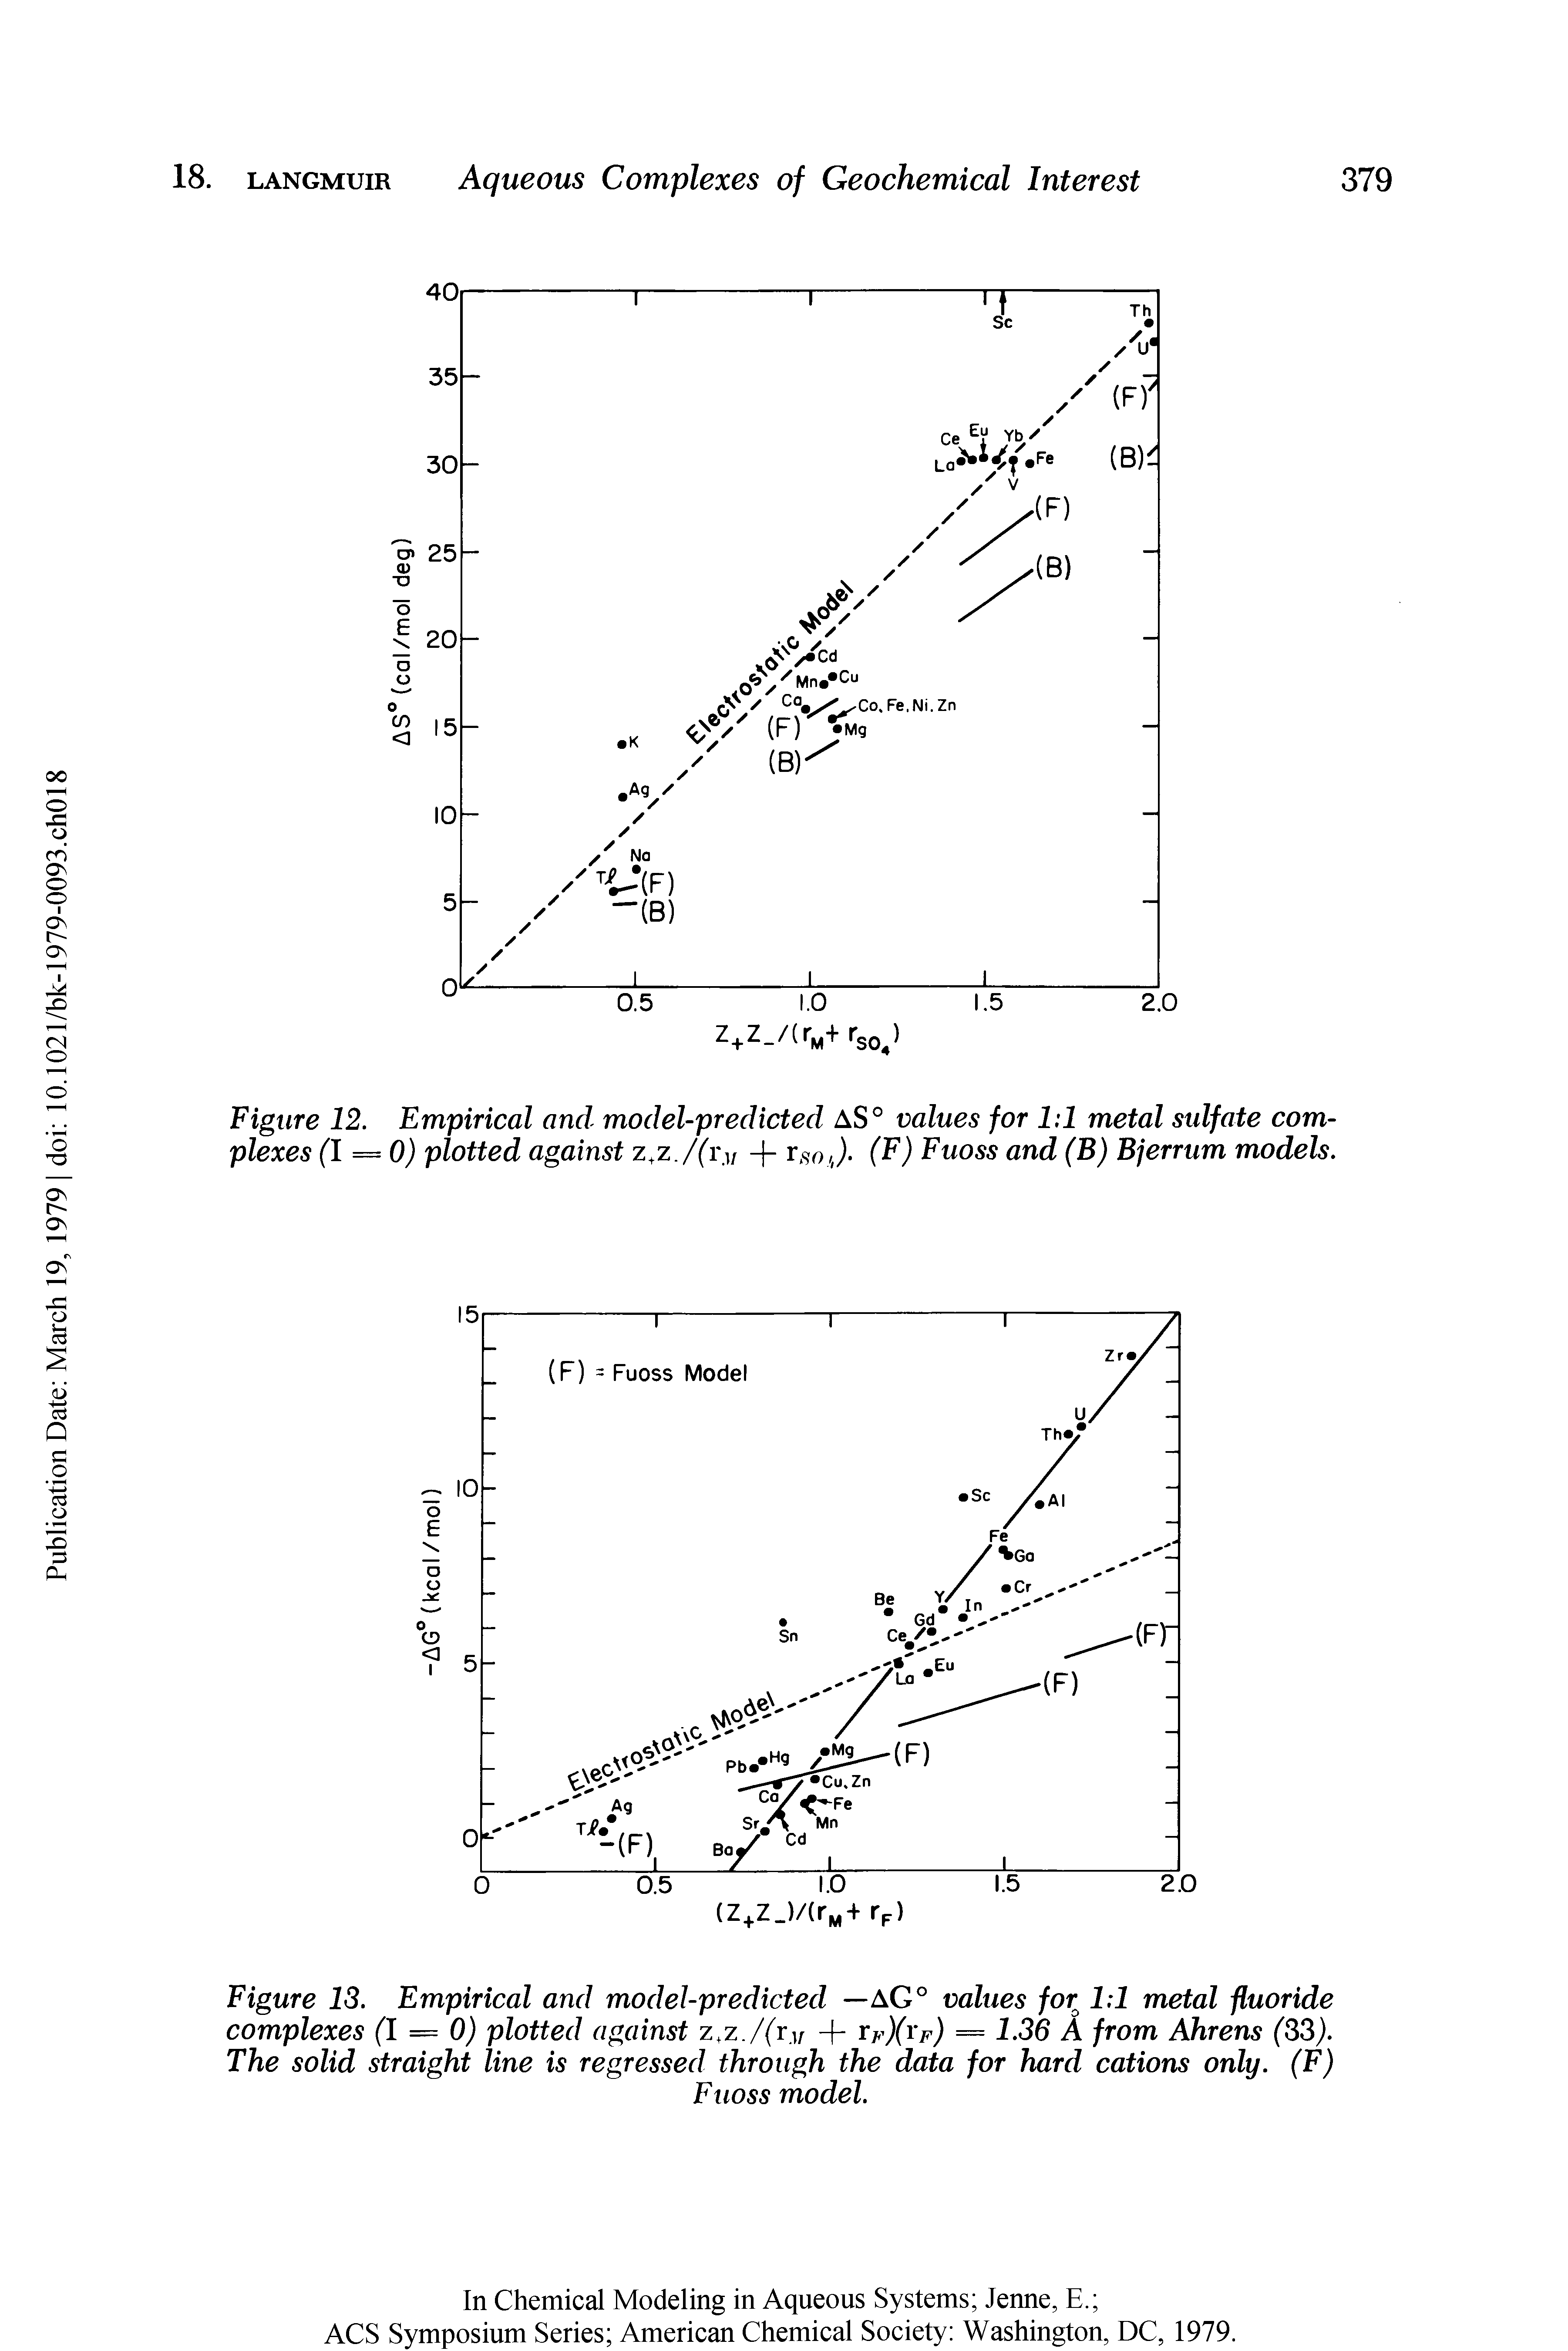 Figure 12. Empirical and model-predicted aS° values for 1 1 metal sulfate complexes (1 = 0) plotted against z,z./(i y + (F) Fuoss and (B) Bjerrum models.